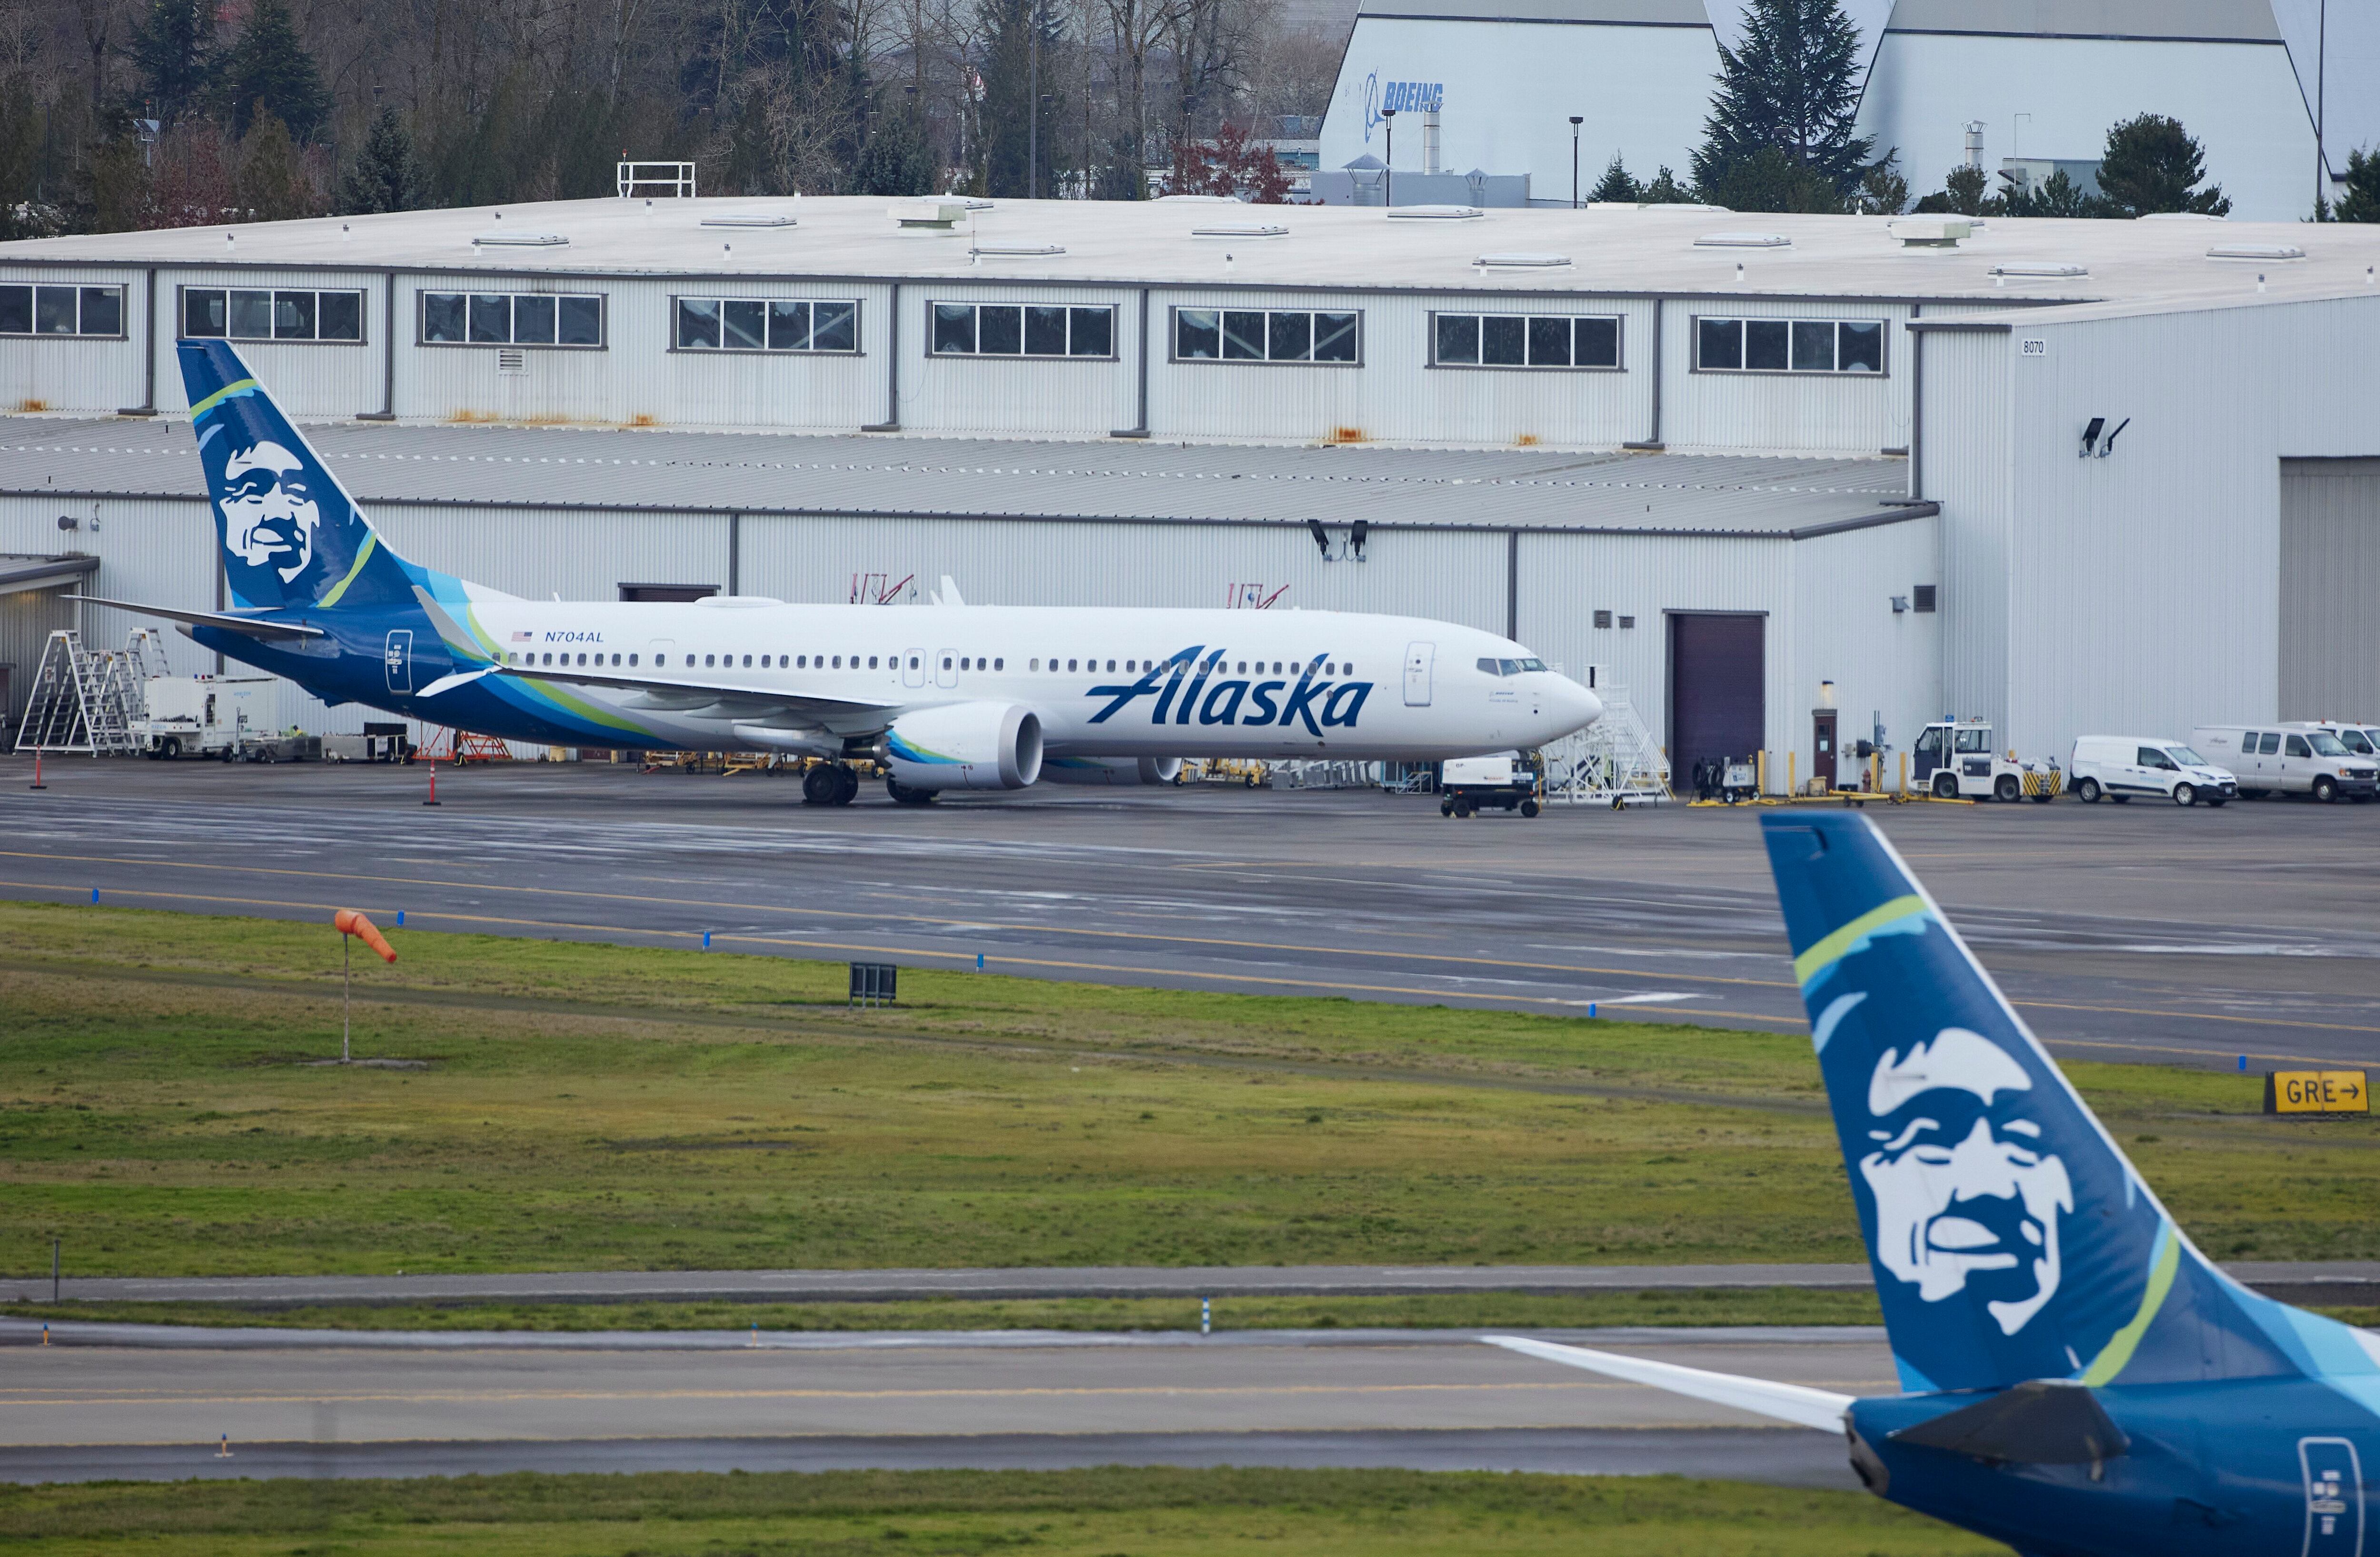 US regulator grounds 171 Boeing planes after window ripped open